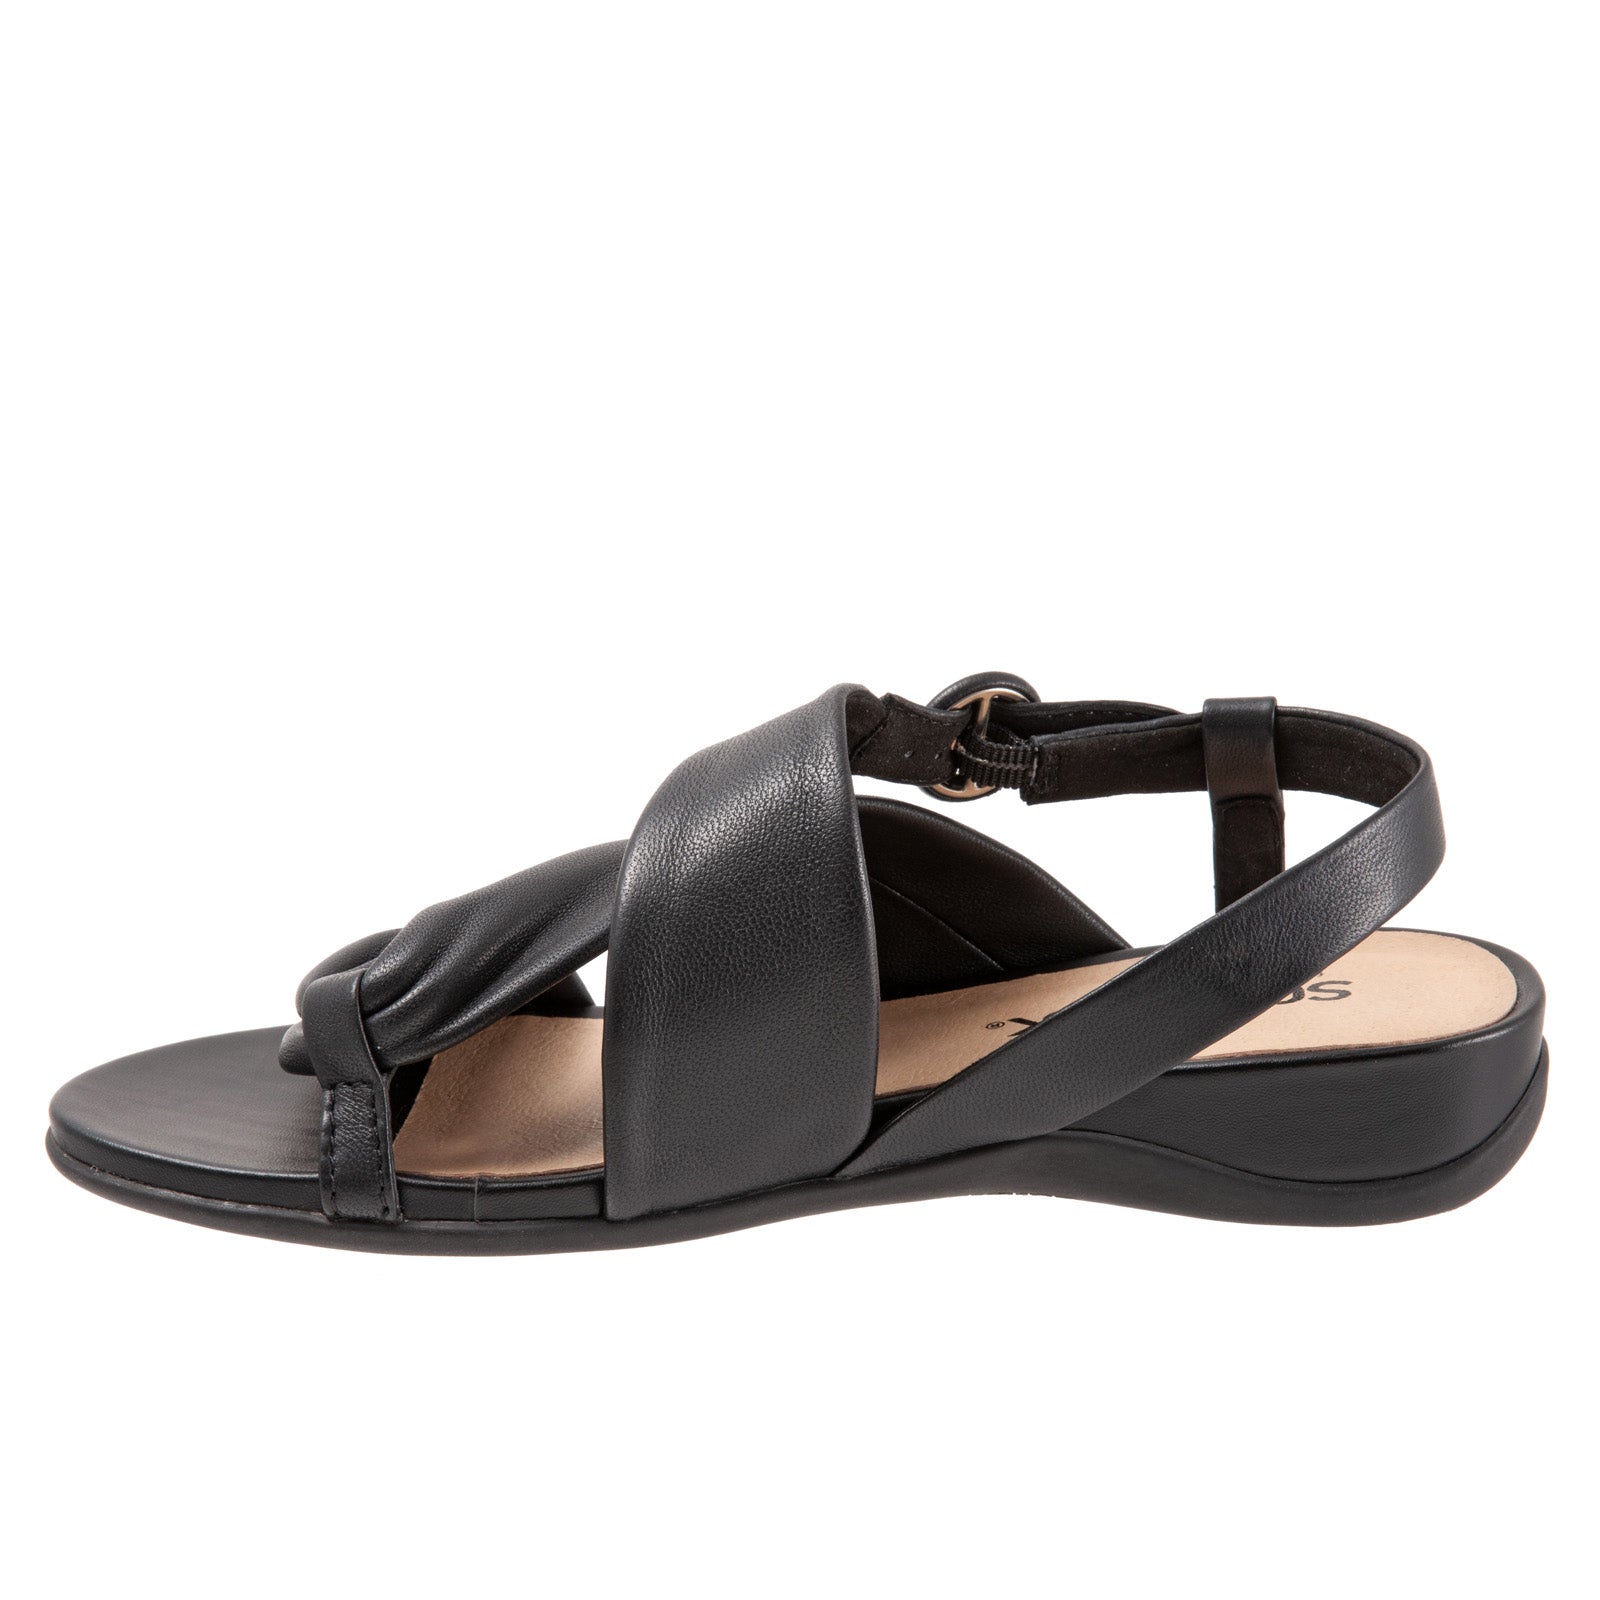 Softwalk Tieli S2109-001 Womens Black Extra Wide Strap Sandals Shoes